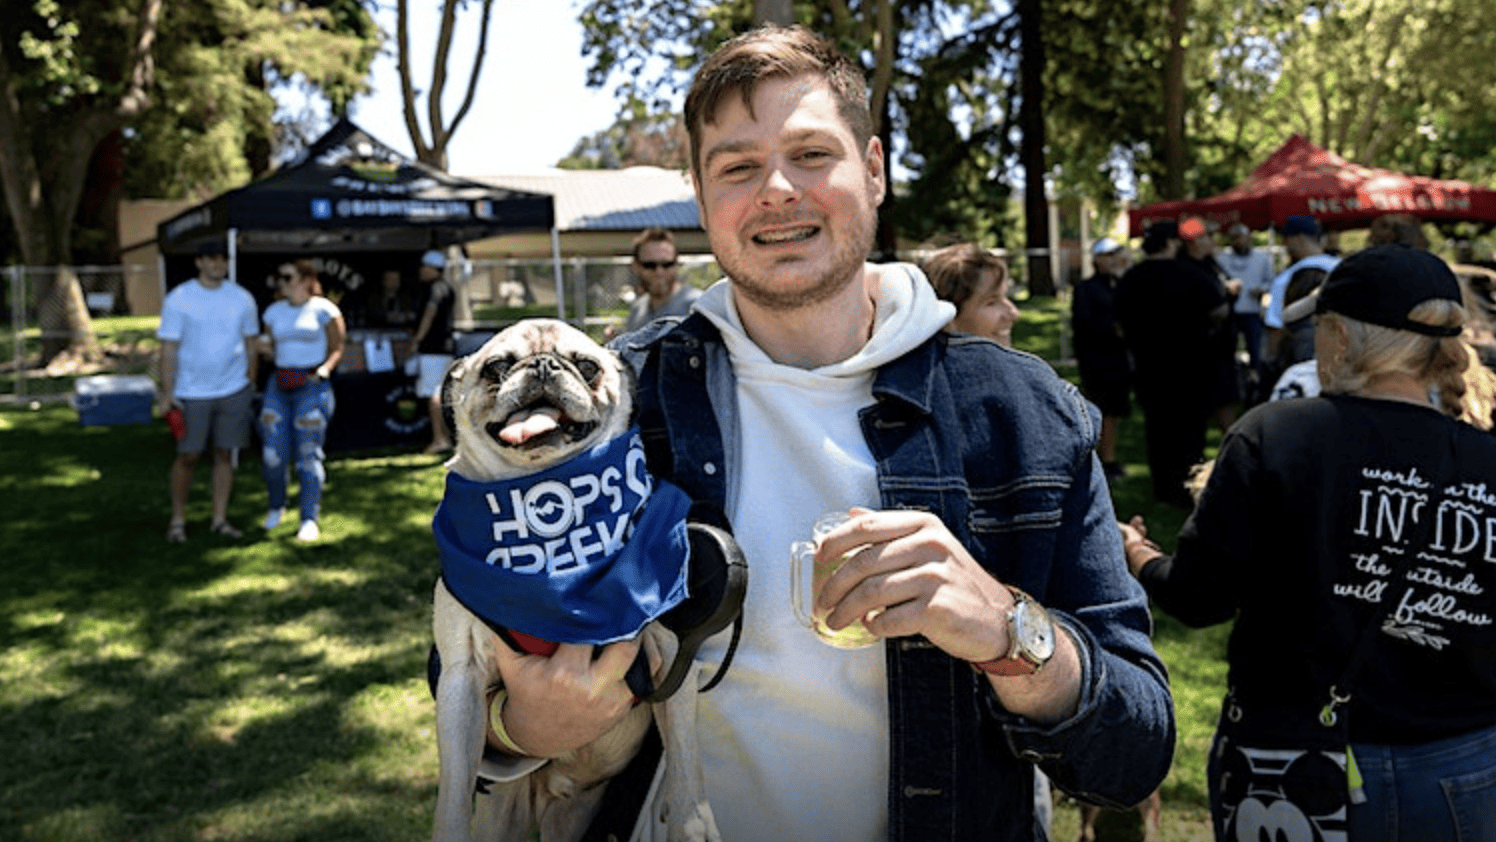 man holding dog in one arm and beer in the other at Hops & Creek Brewfest.